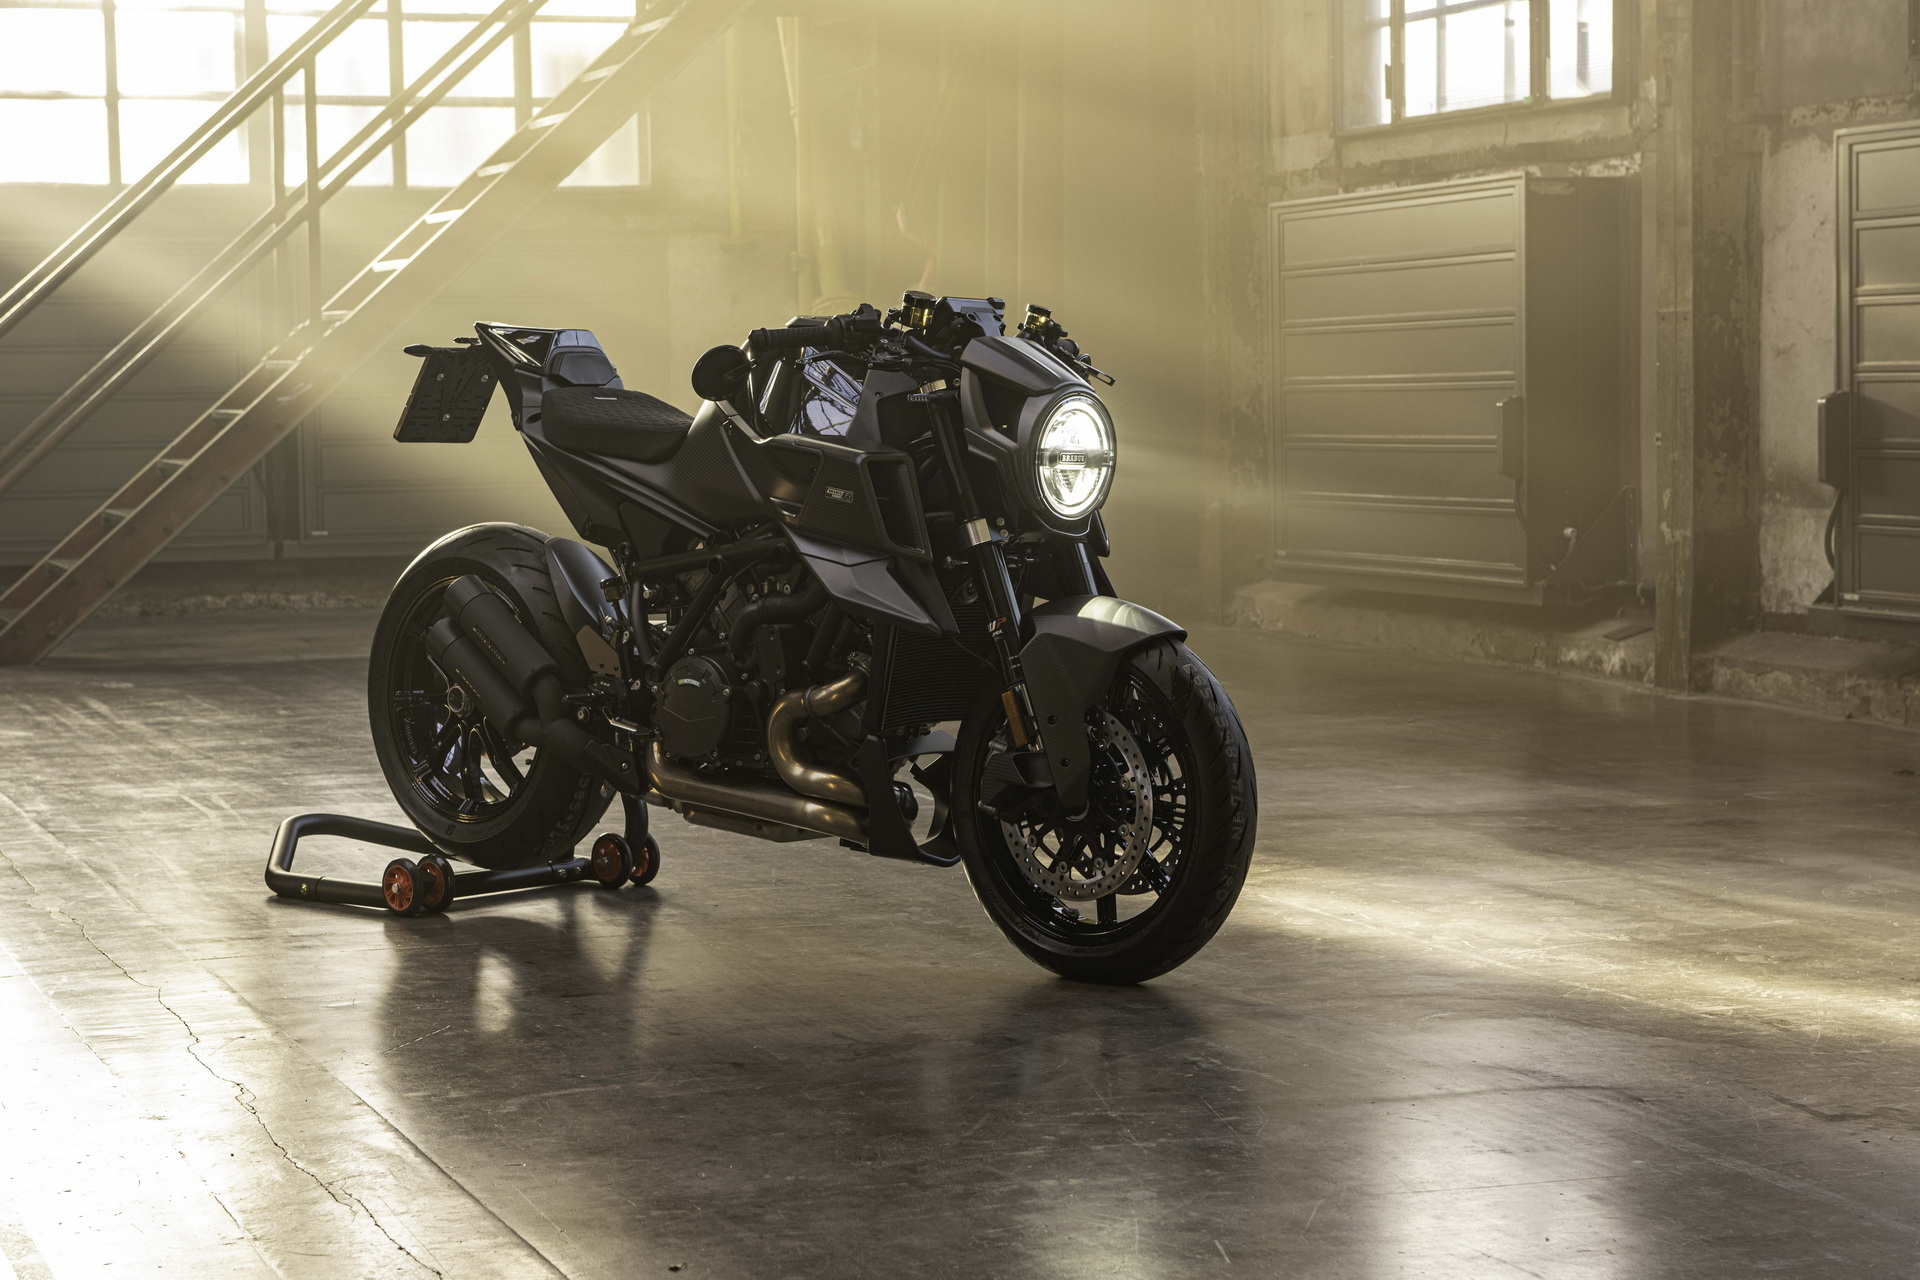 Brabus Unleashes Its Second Ever Motorcycle, The KTM 1300 R Edition 23